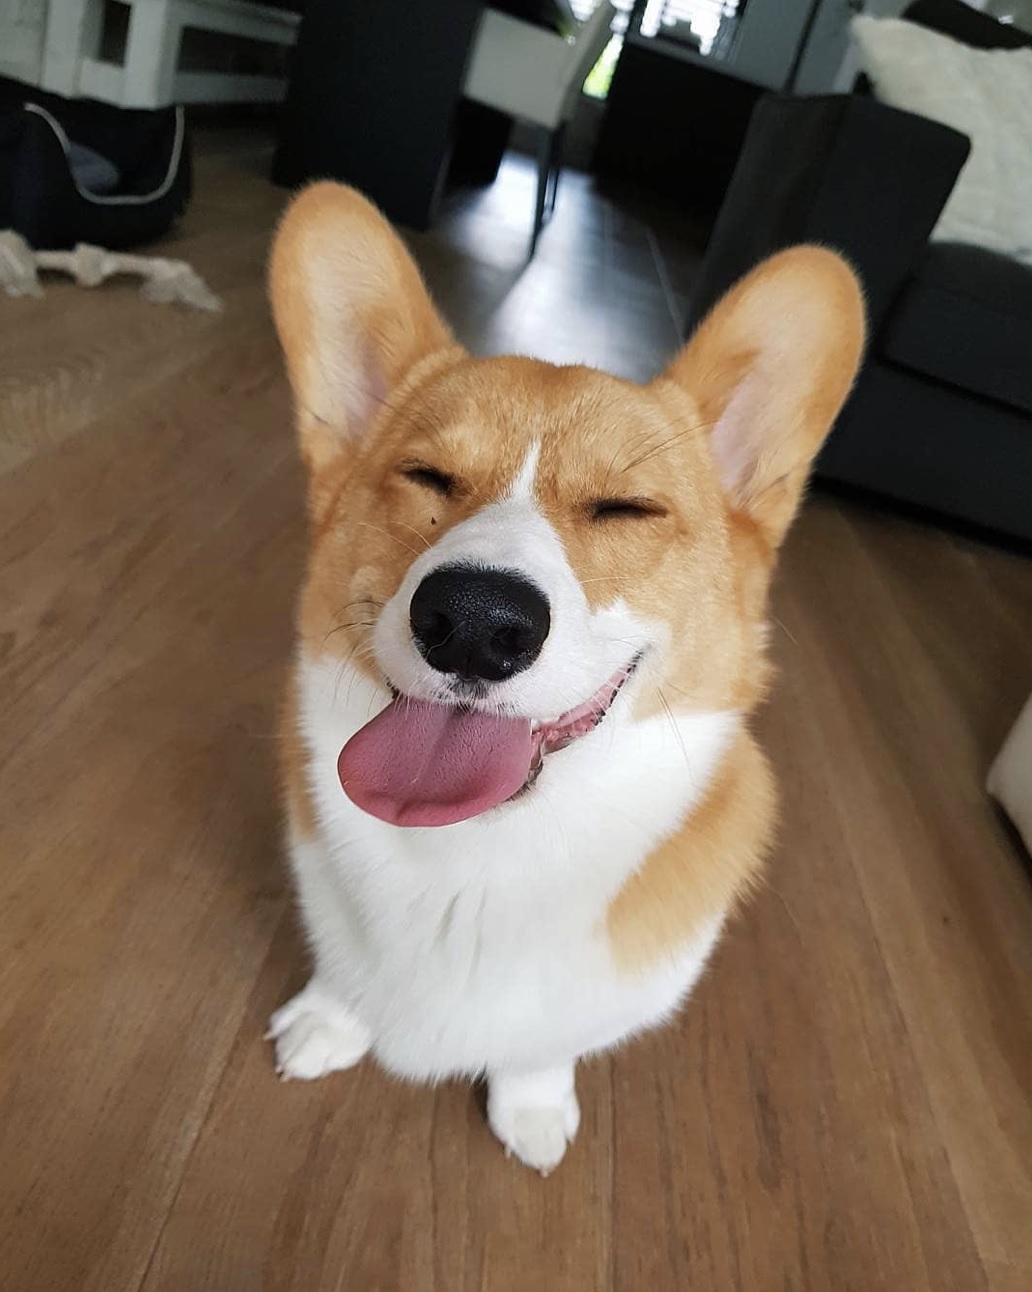 A Corgi sitting on the floor while smiling with its tongue out